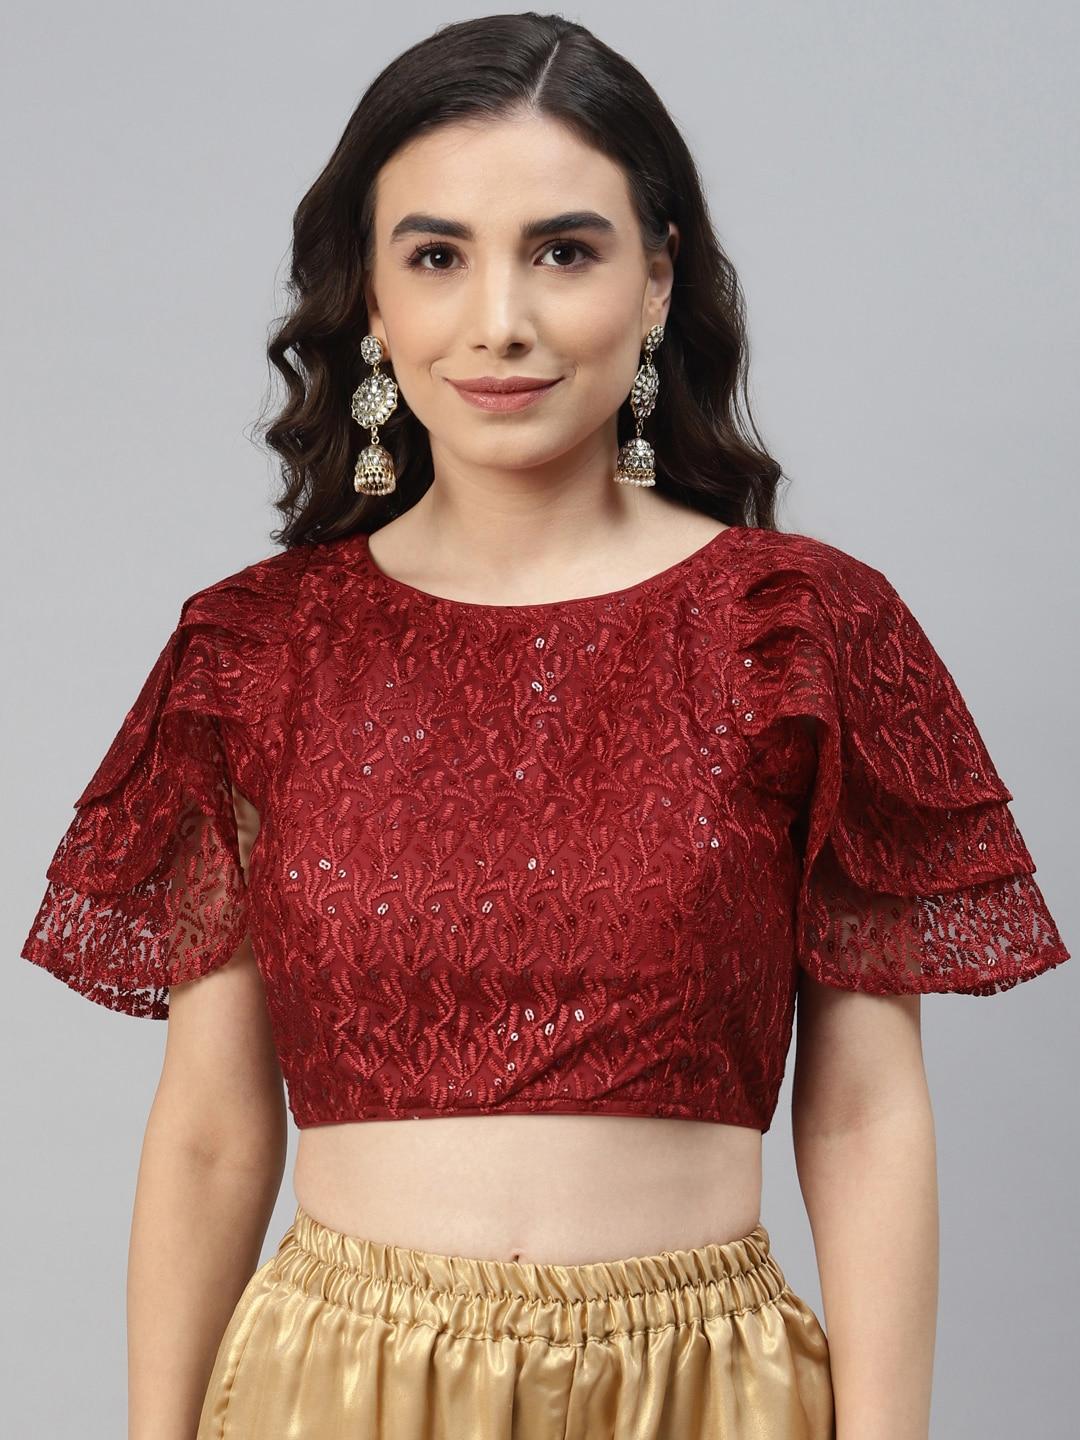 SHOPGARB Women Maroon Sequined Padded Saree Blouse